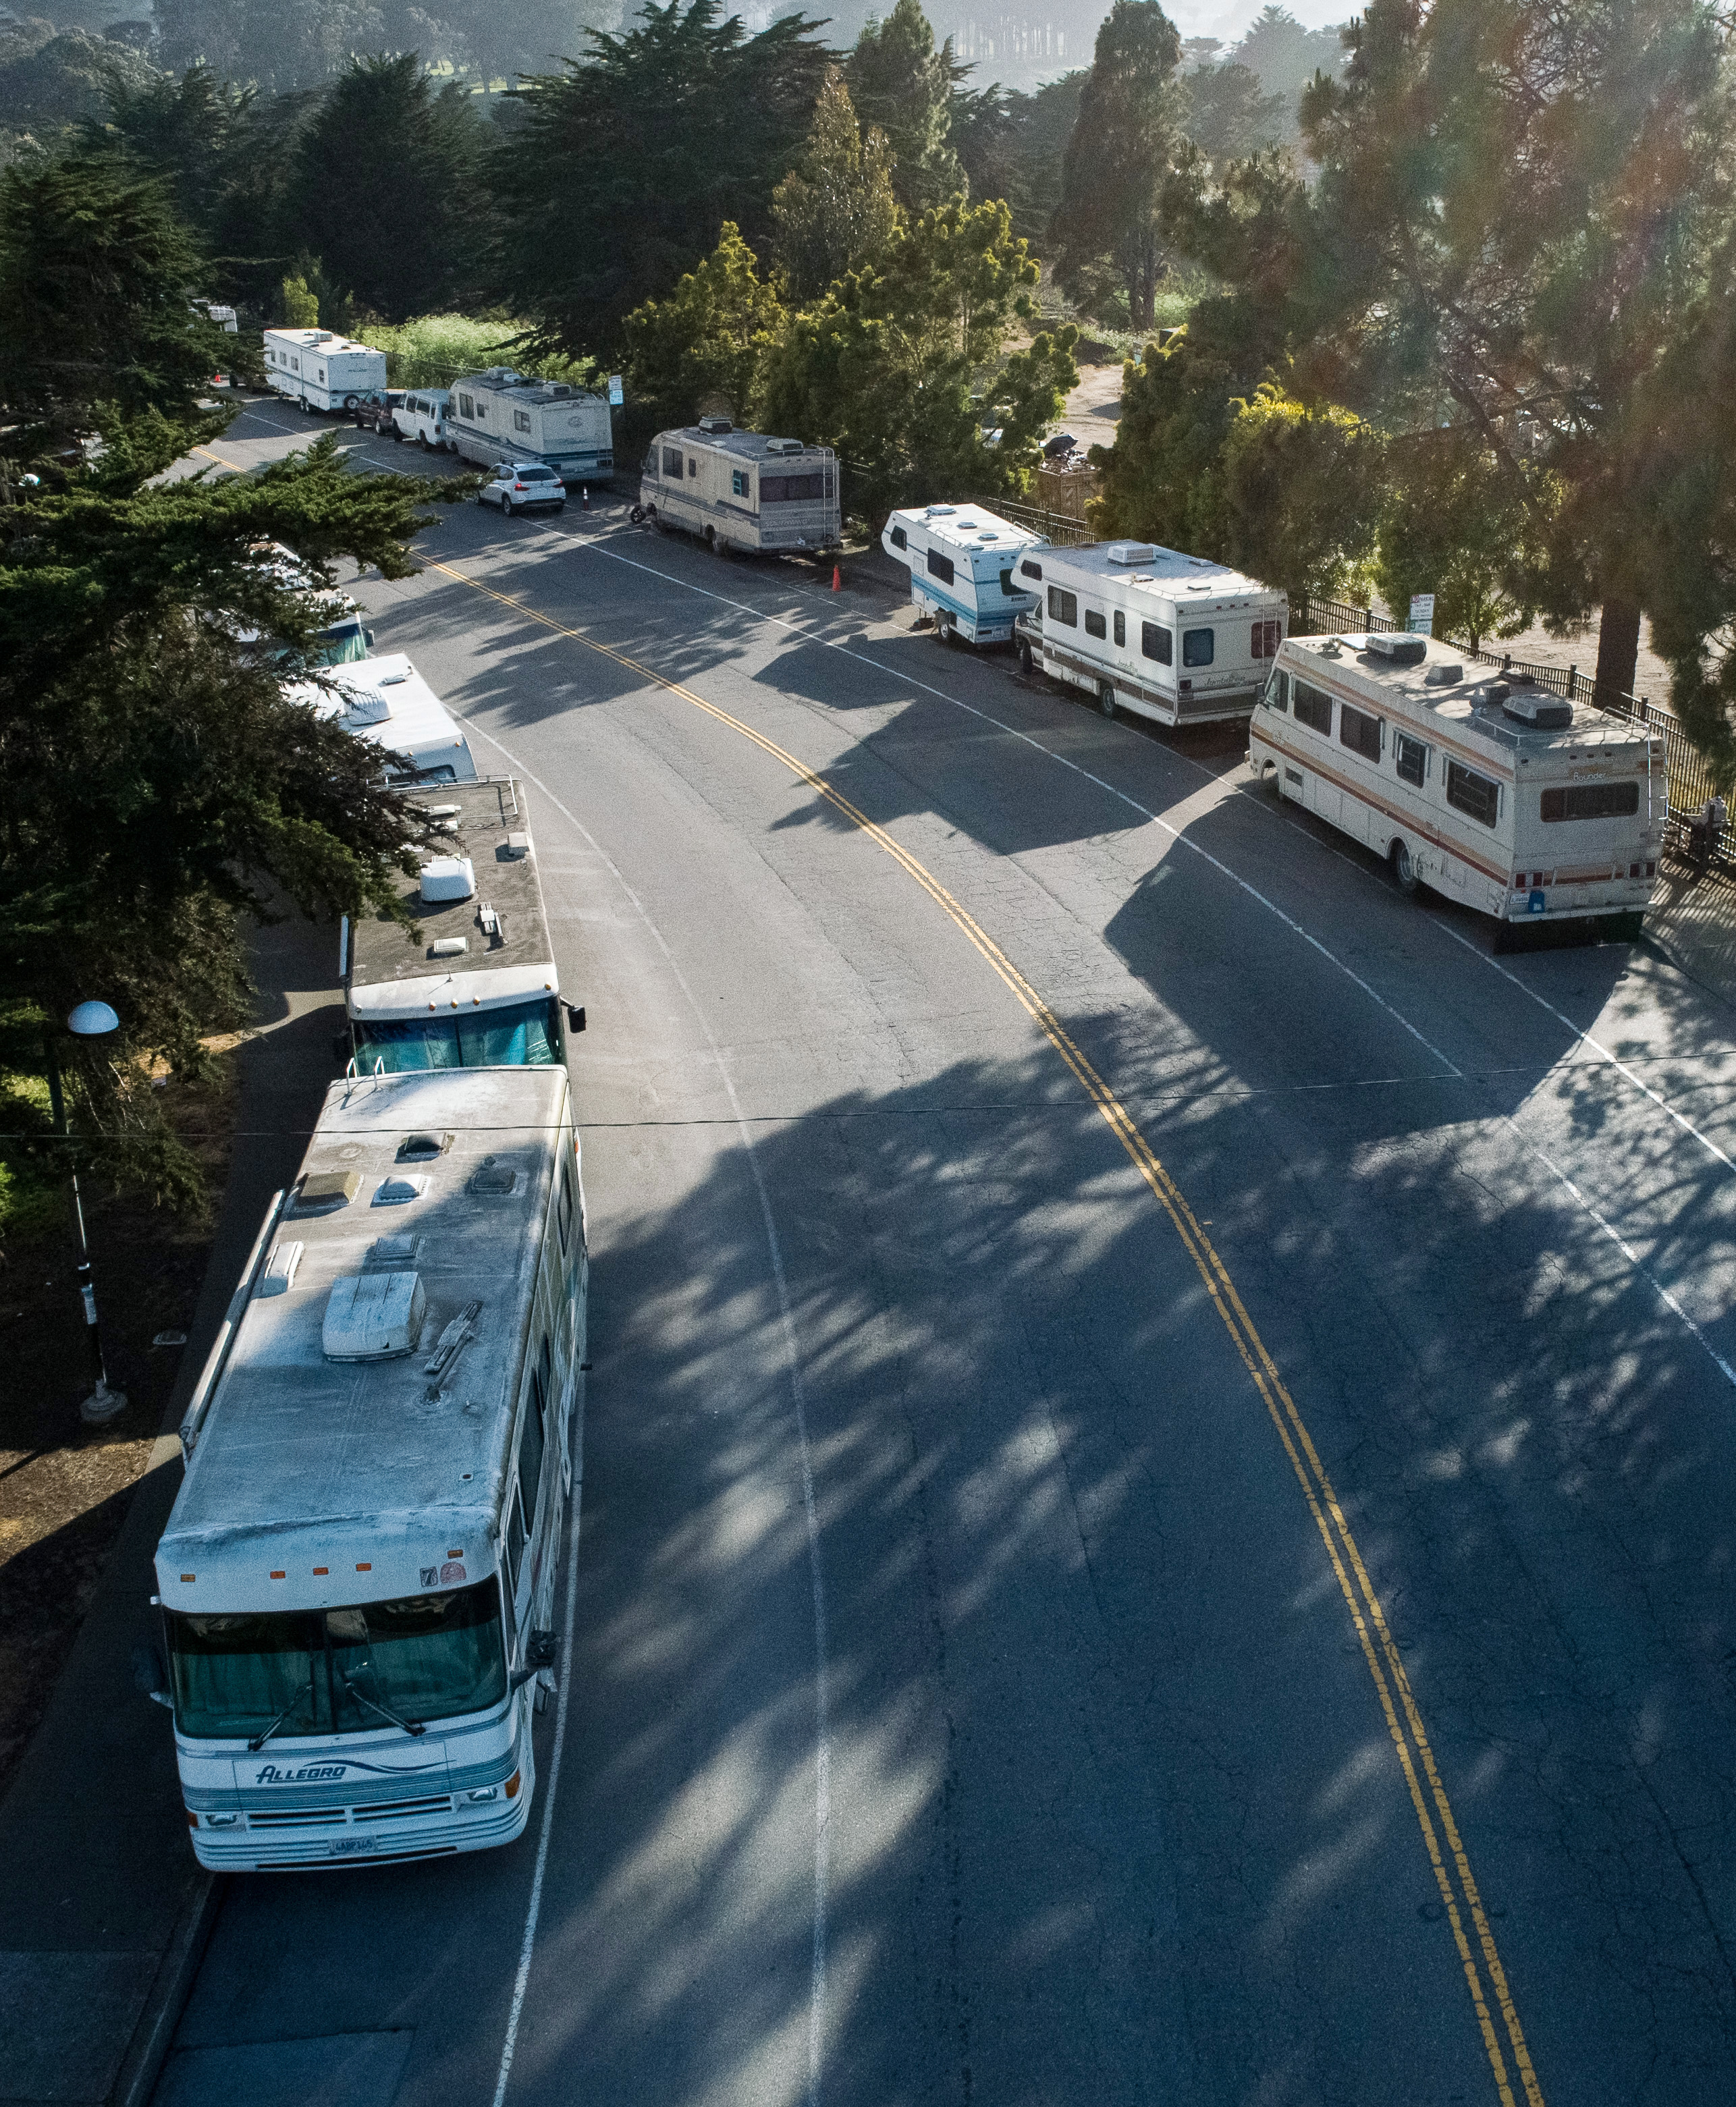 A curved street lined with multiple parked RVs on both sides, set against a backdrop of lush green trees and soft sunlight filtering through the branches.